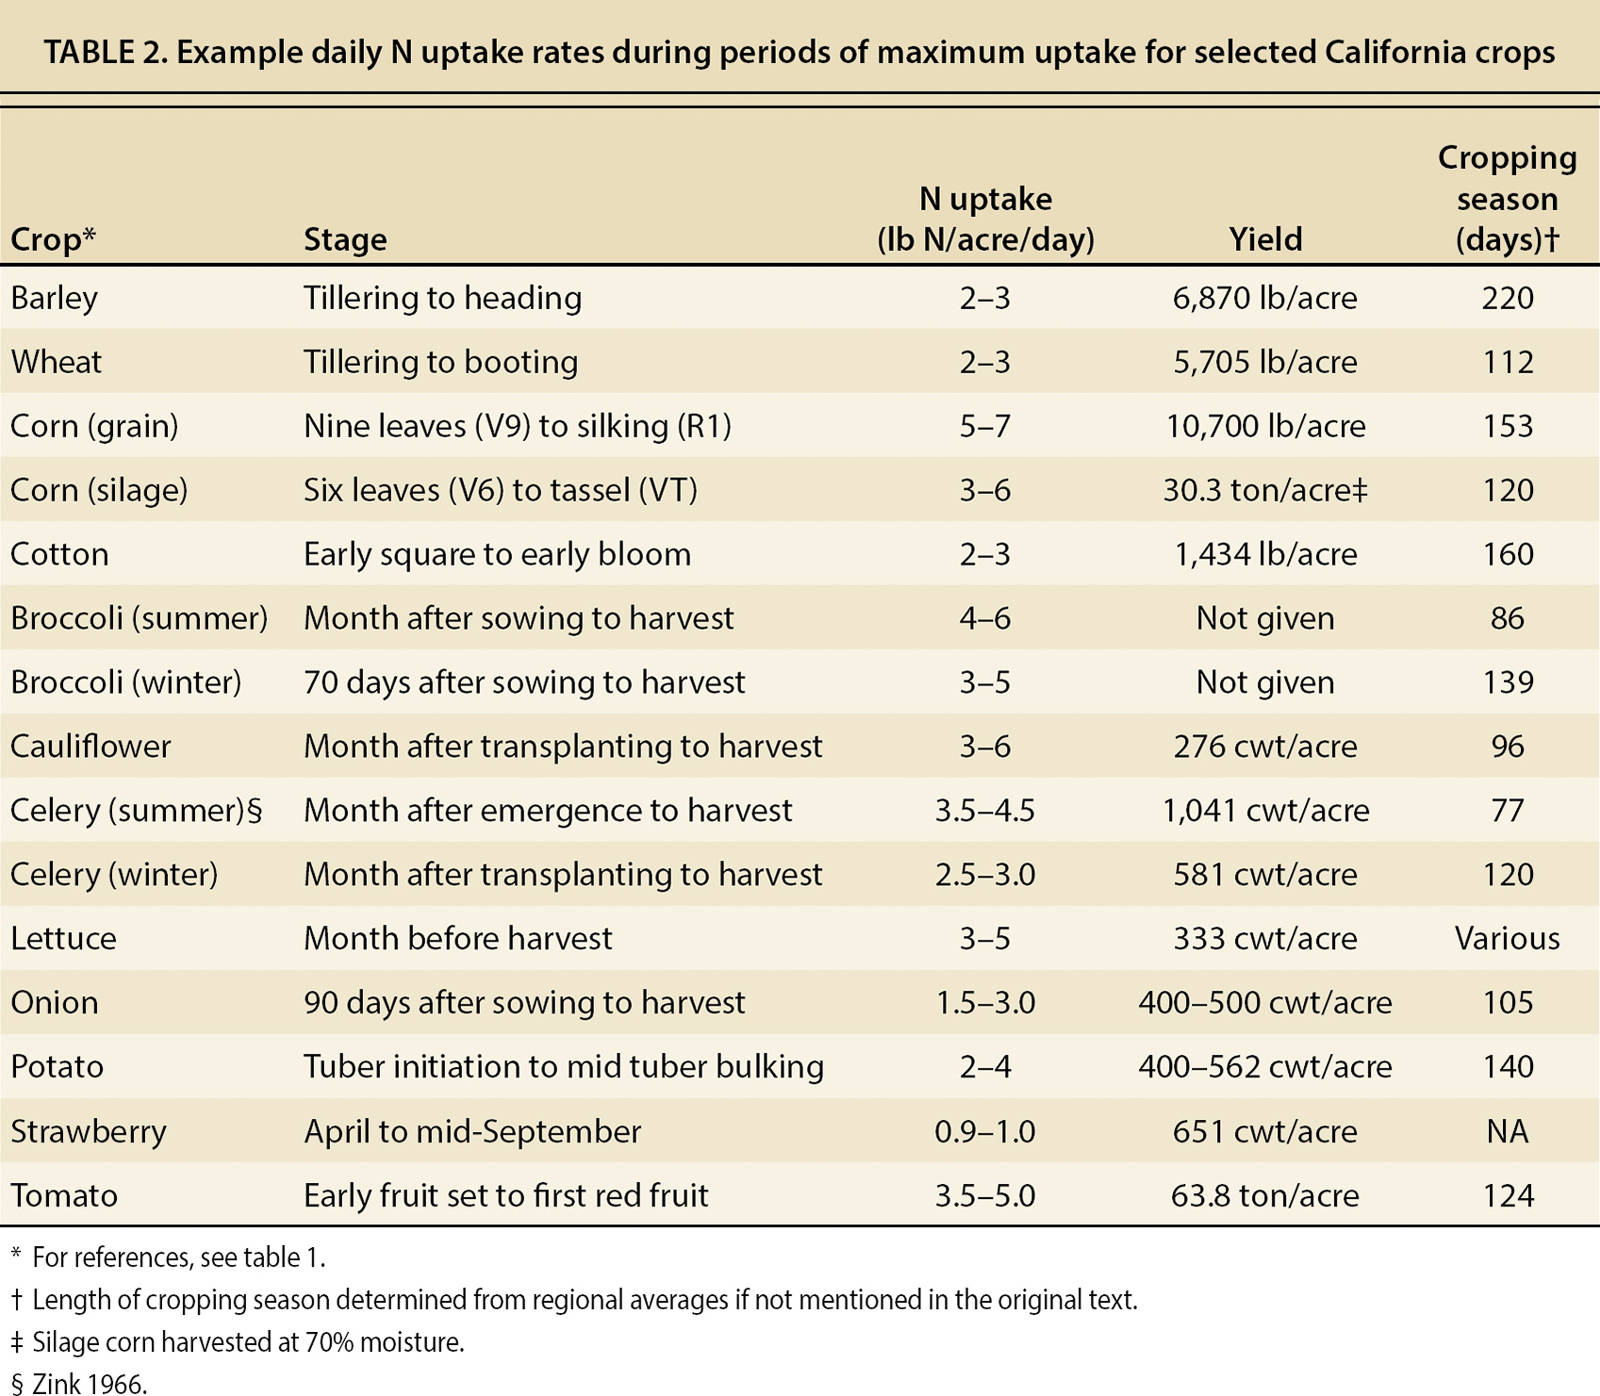 Example daily N uptake rates during periods of maximum uptake for selected California crops